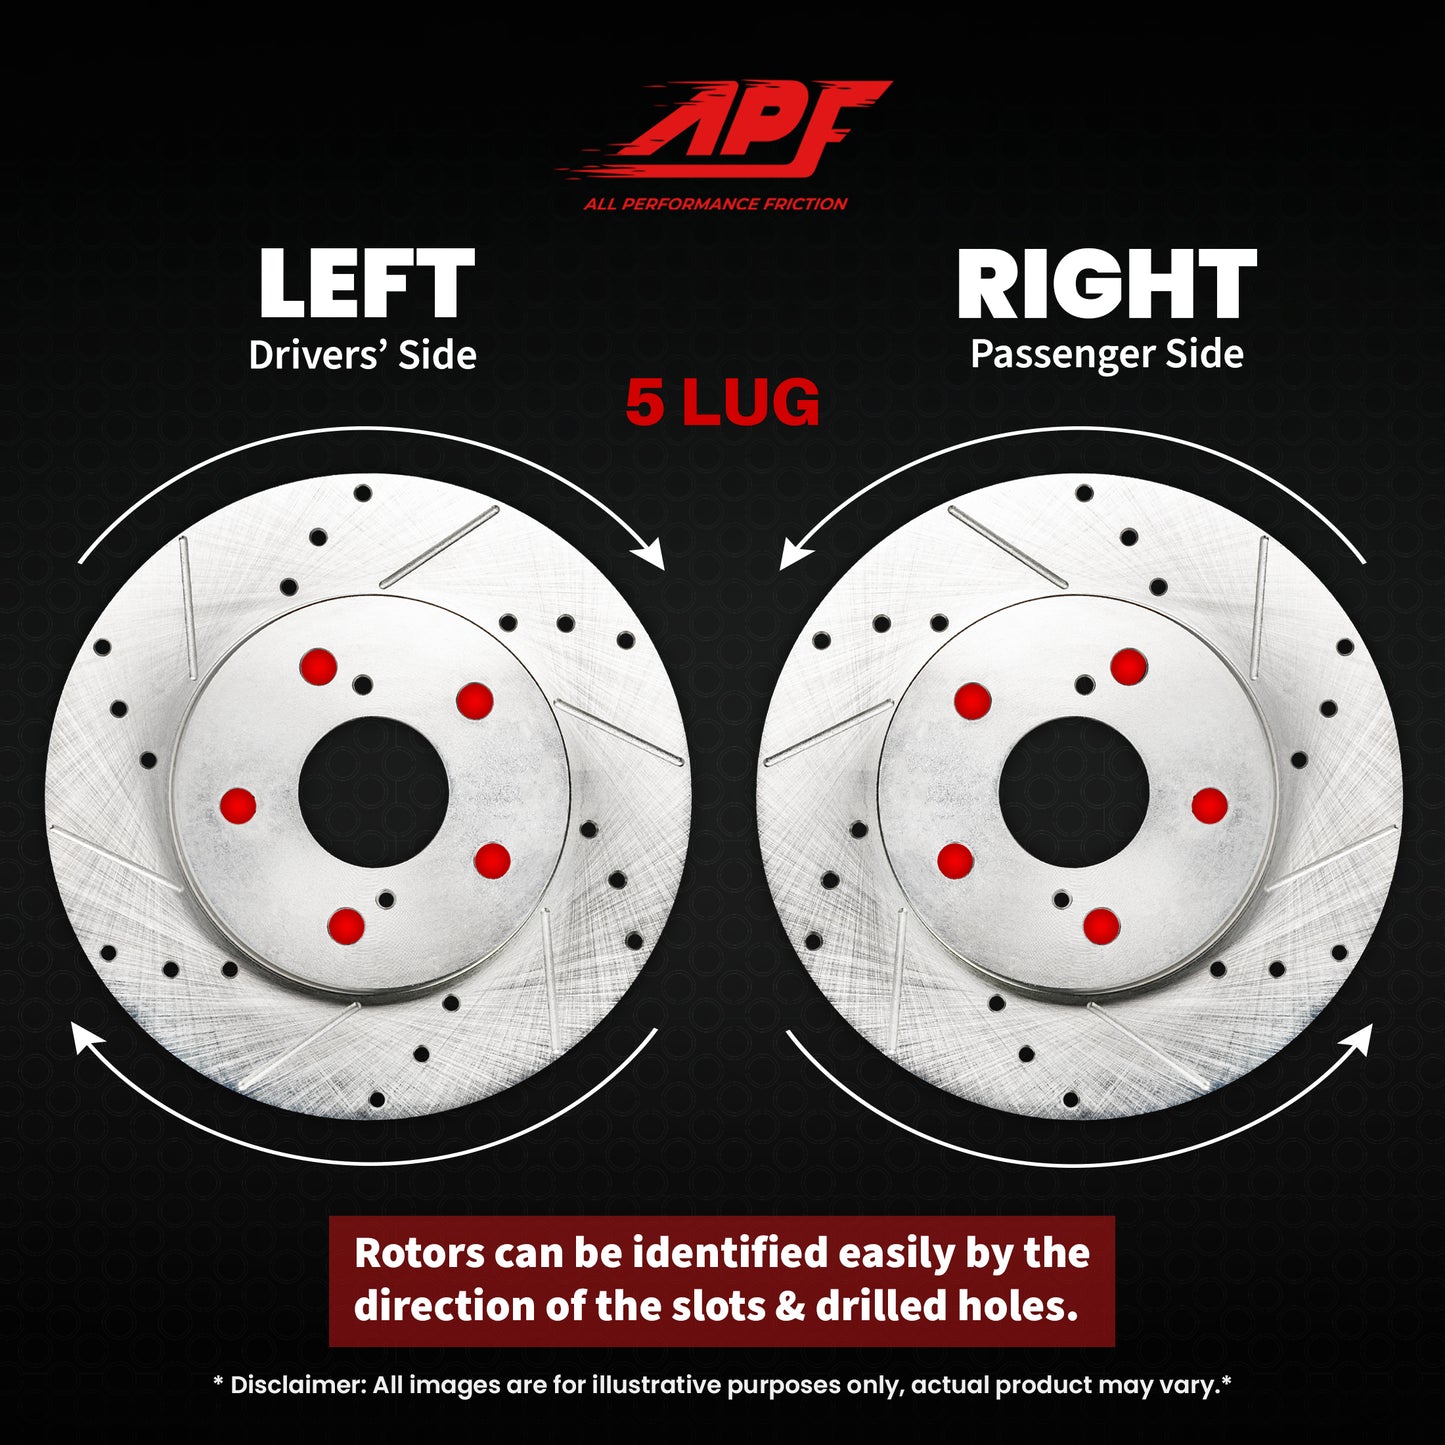 APF All Performance Friction Front Rotors compatible with Ford Taurus 2011-2019 Zinc Drilled Slotted Rotors | $188.92